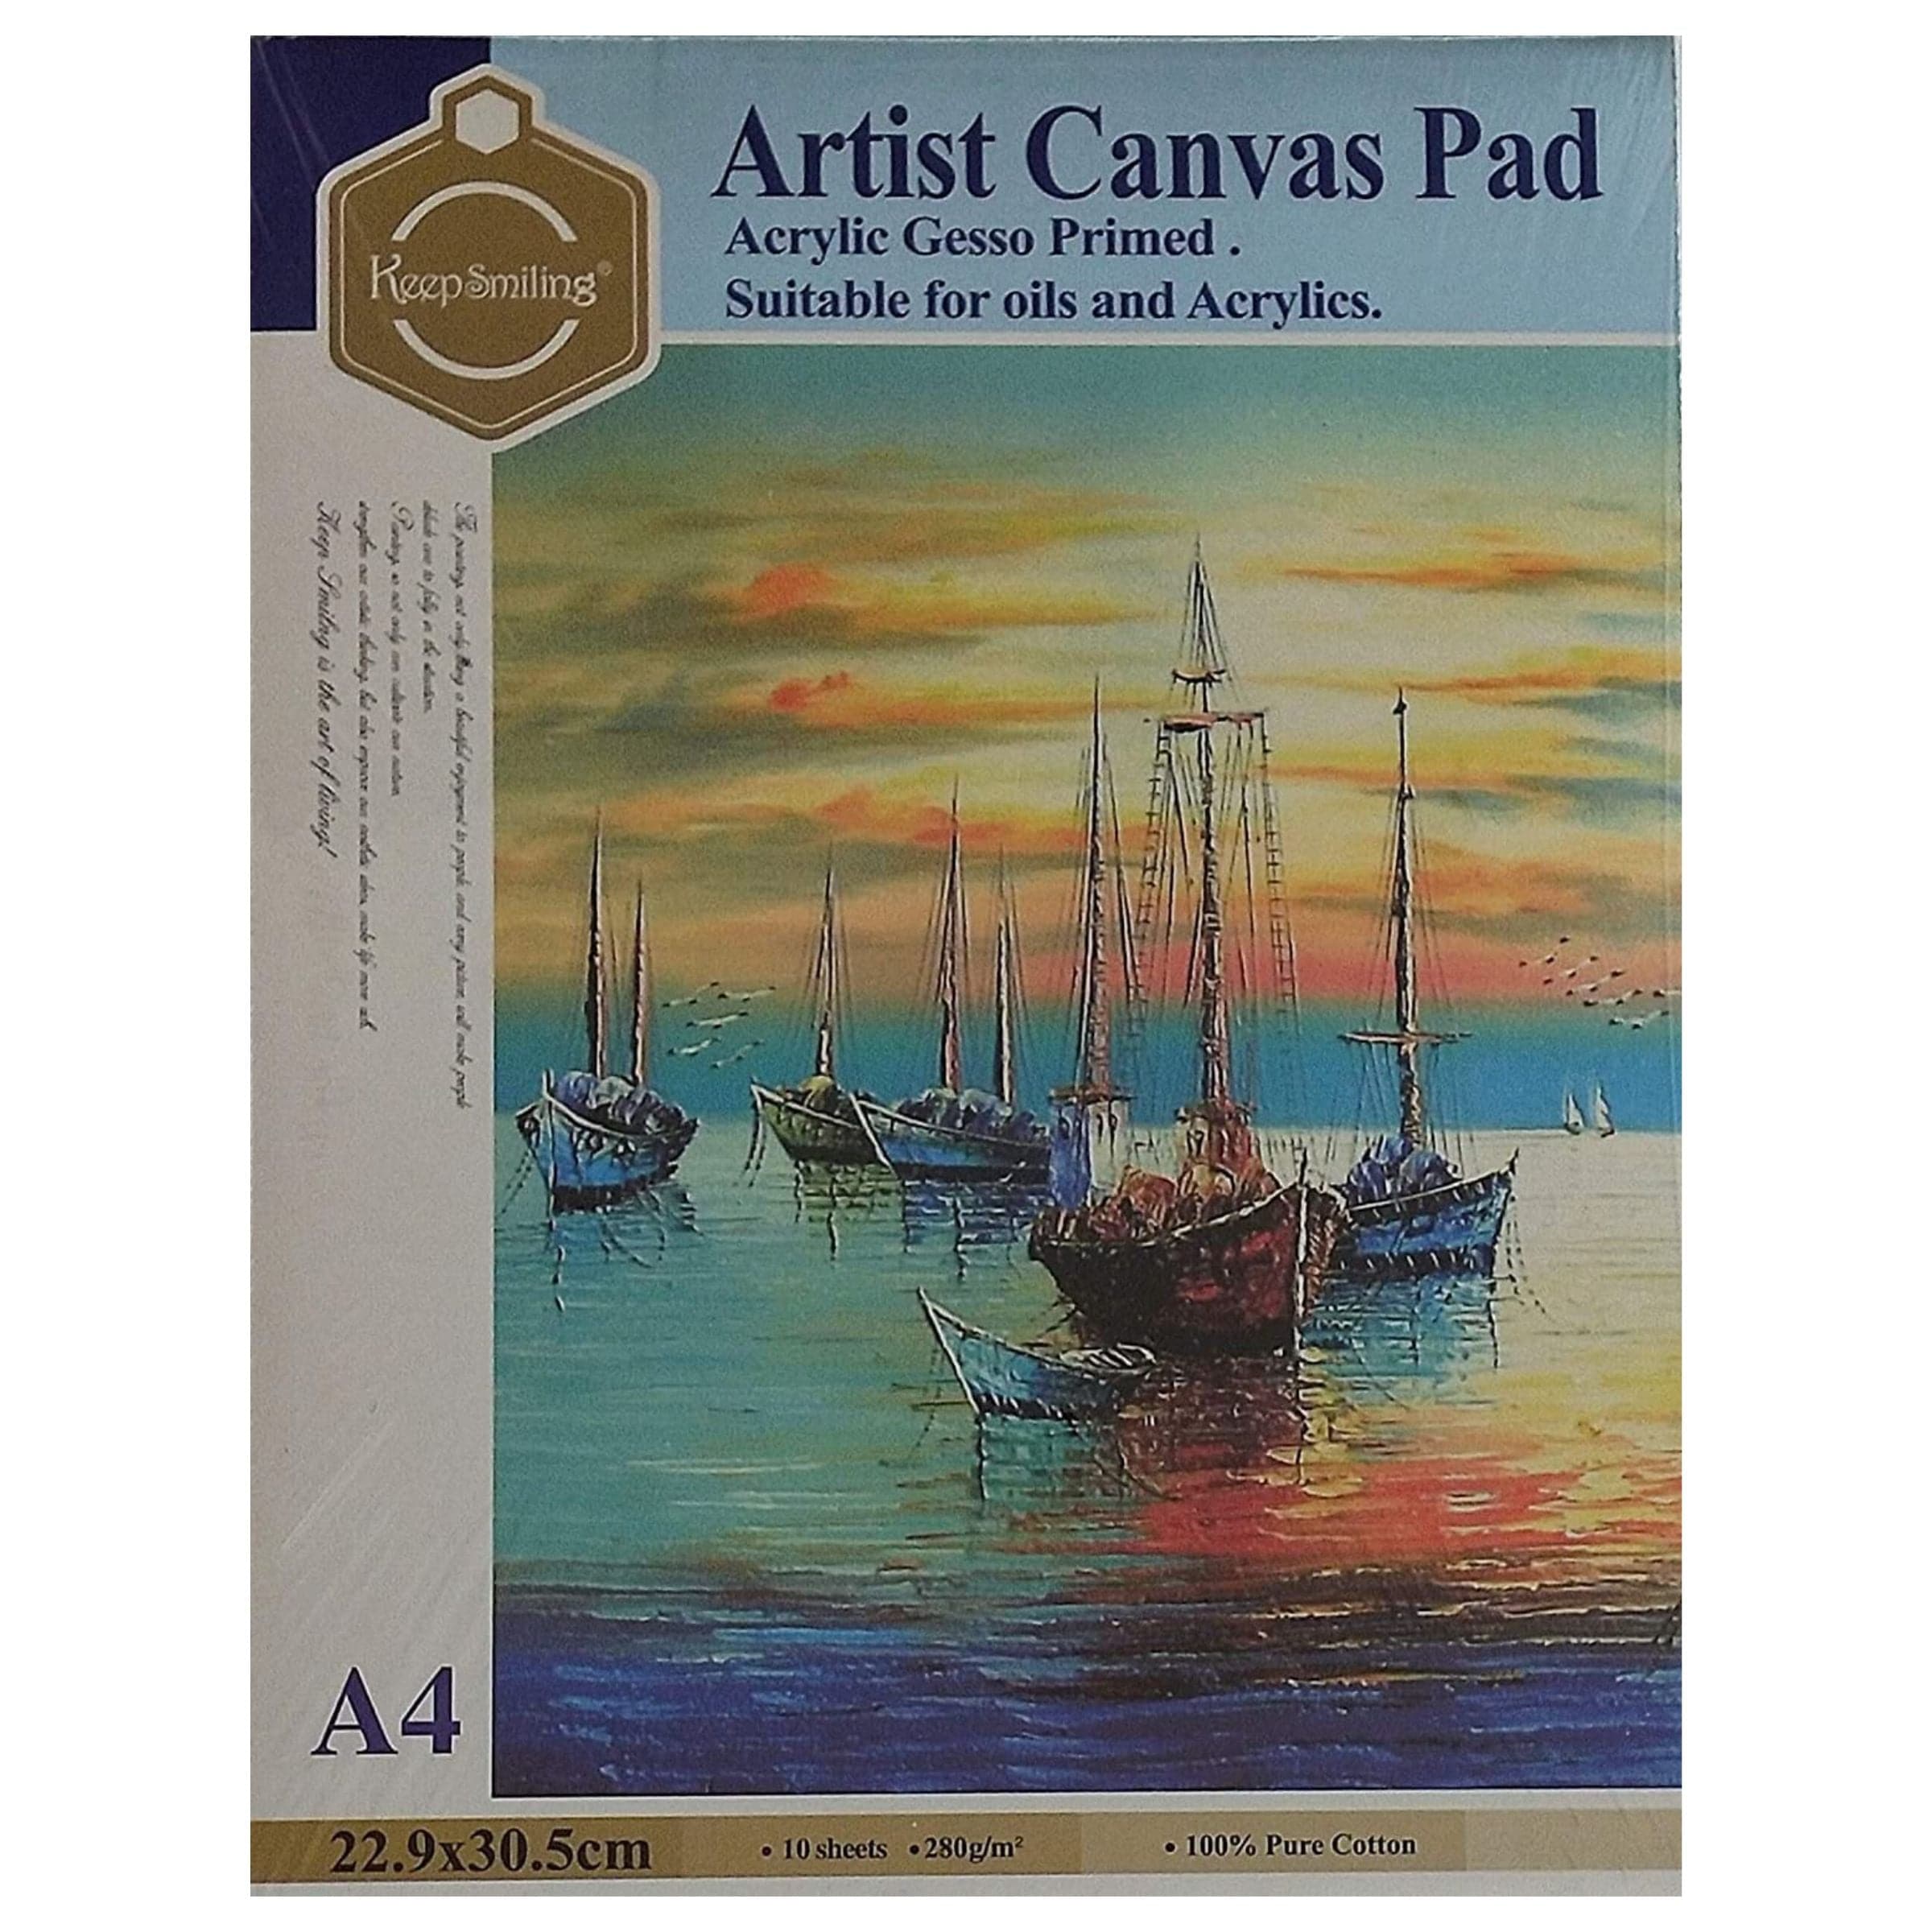 Keep Smiling Artist Canvas Pad Acrylic Gesso Primed A4 Size 22.9 x 30.5cm  (10 Sheets)